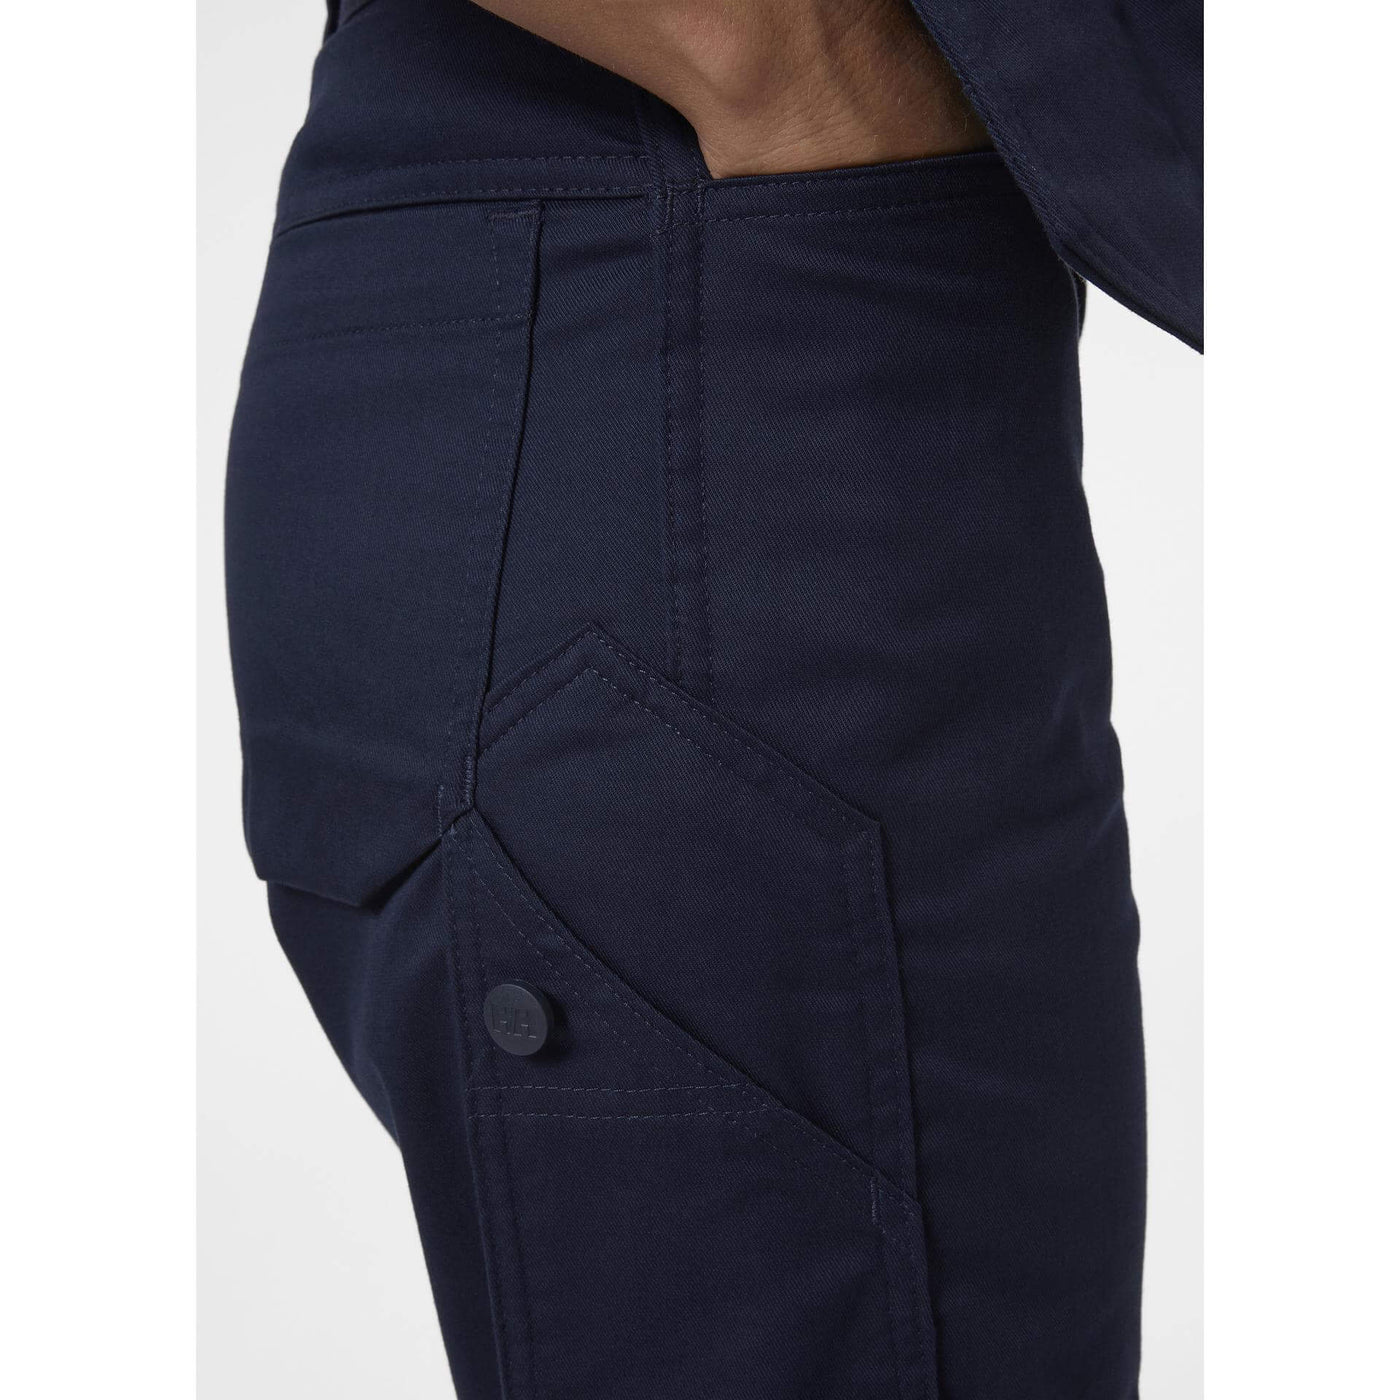 Helly Hansen Womens Luna Light Stretch Construction Trousers Navy 6 Feature 2#colour_navy